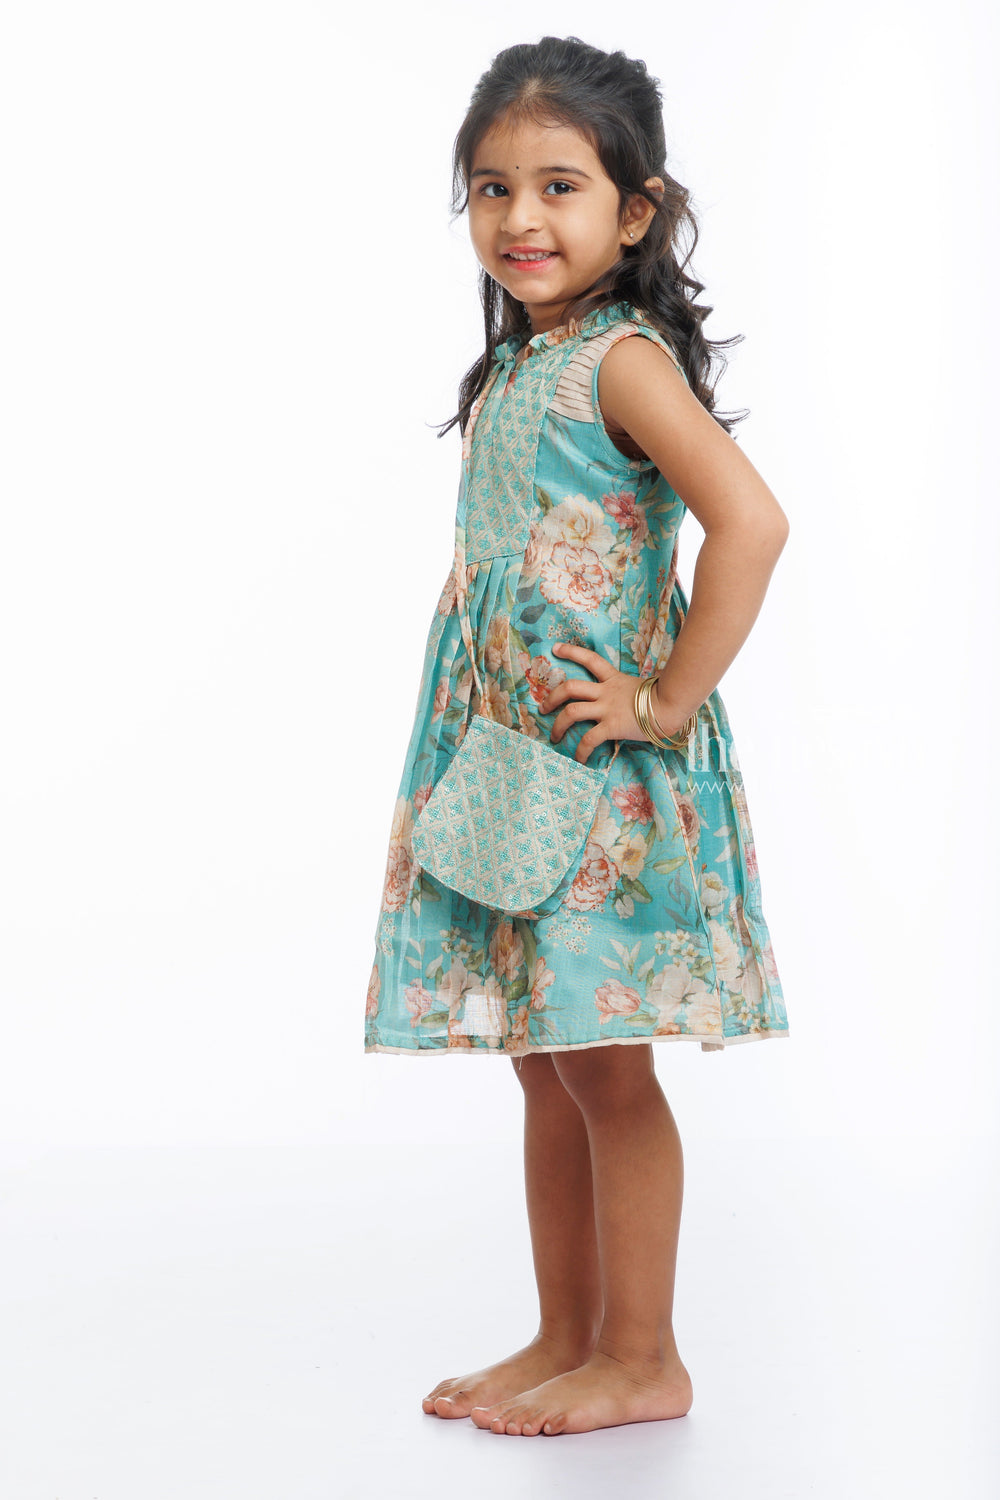 The Nesavu Girls Cotton Frock Floral Whimsy: Girls Designer Cotton Frock with Pastel Panache Nesavu Shop the Latest Printed Cotton Frocks for Girls | Unique  Comfortable | The Nesavu